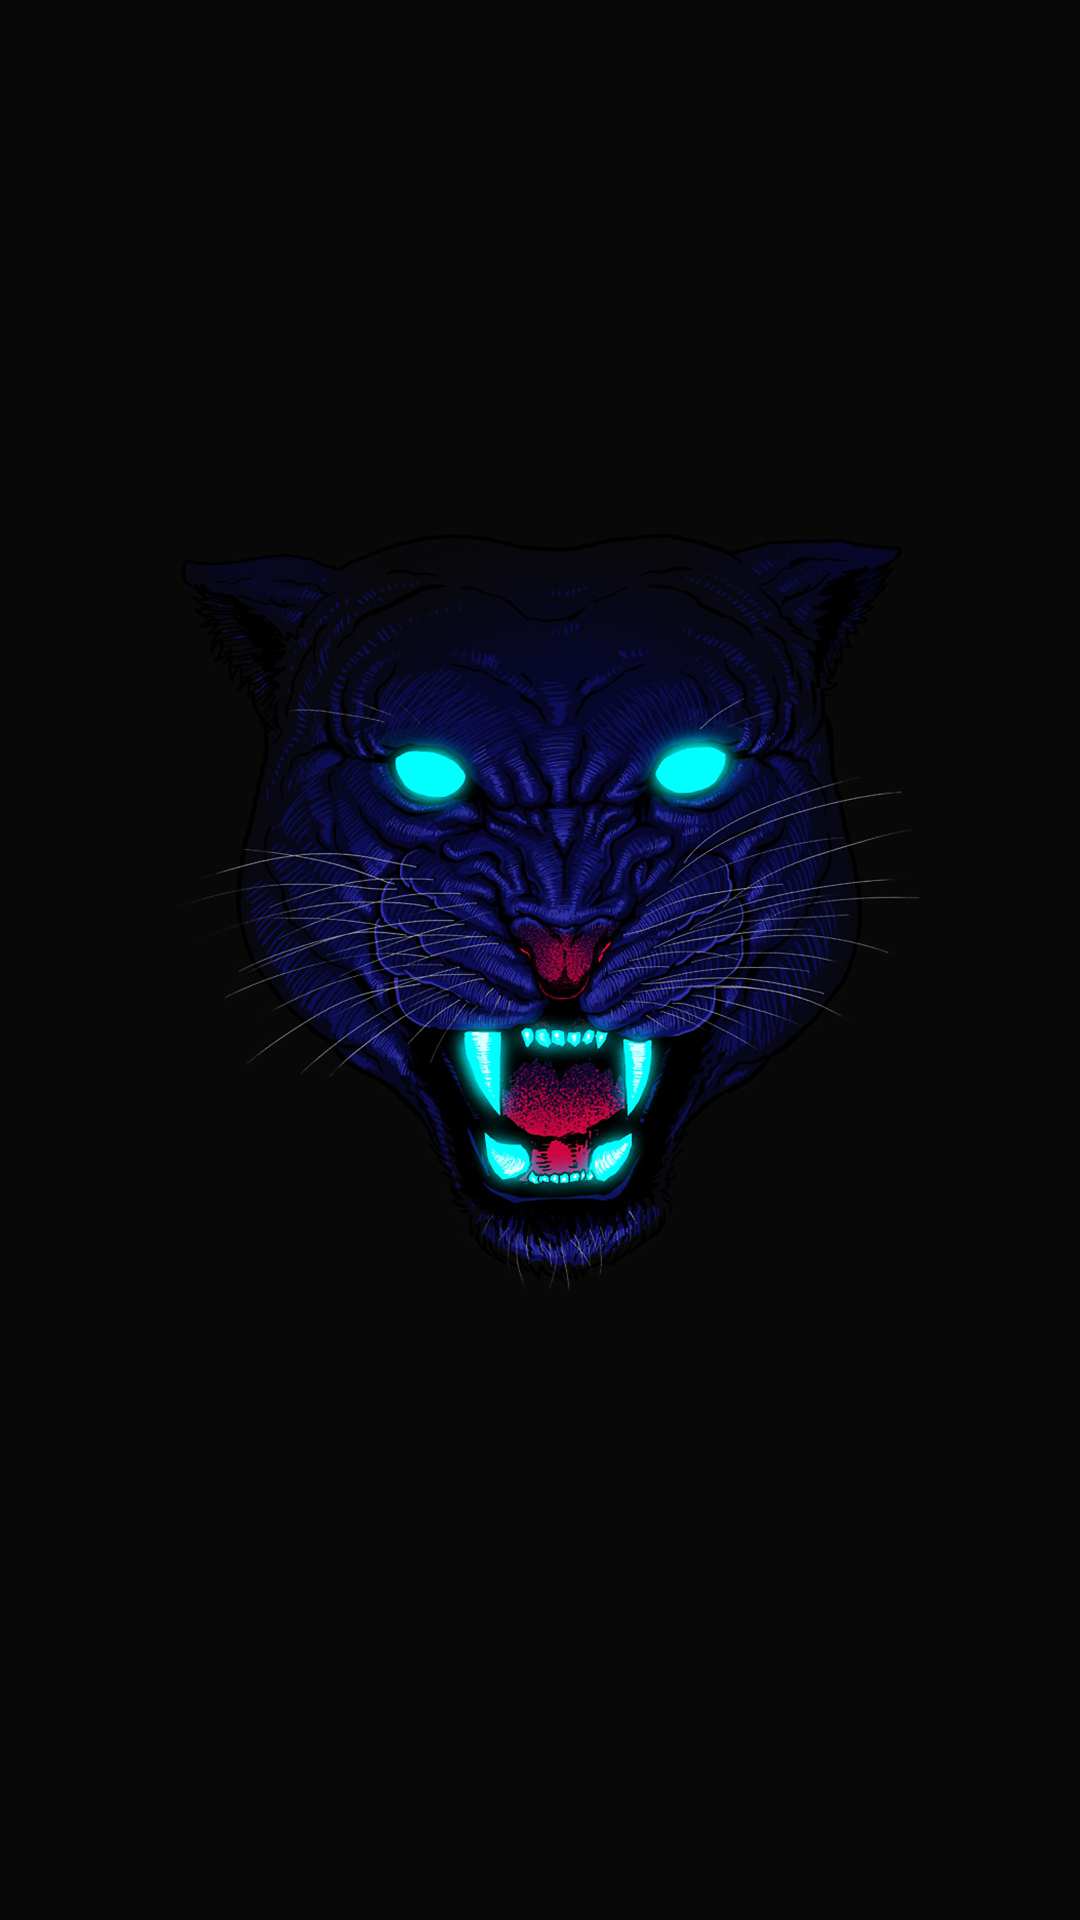 Download wallpaper 800x1200 panther, animal, big cat, predator, wild, black  iphone 4s/4 for parallax hd background